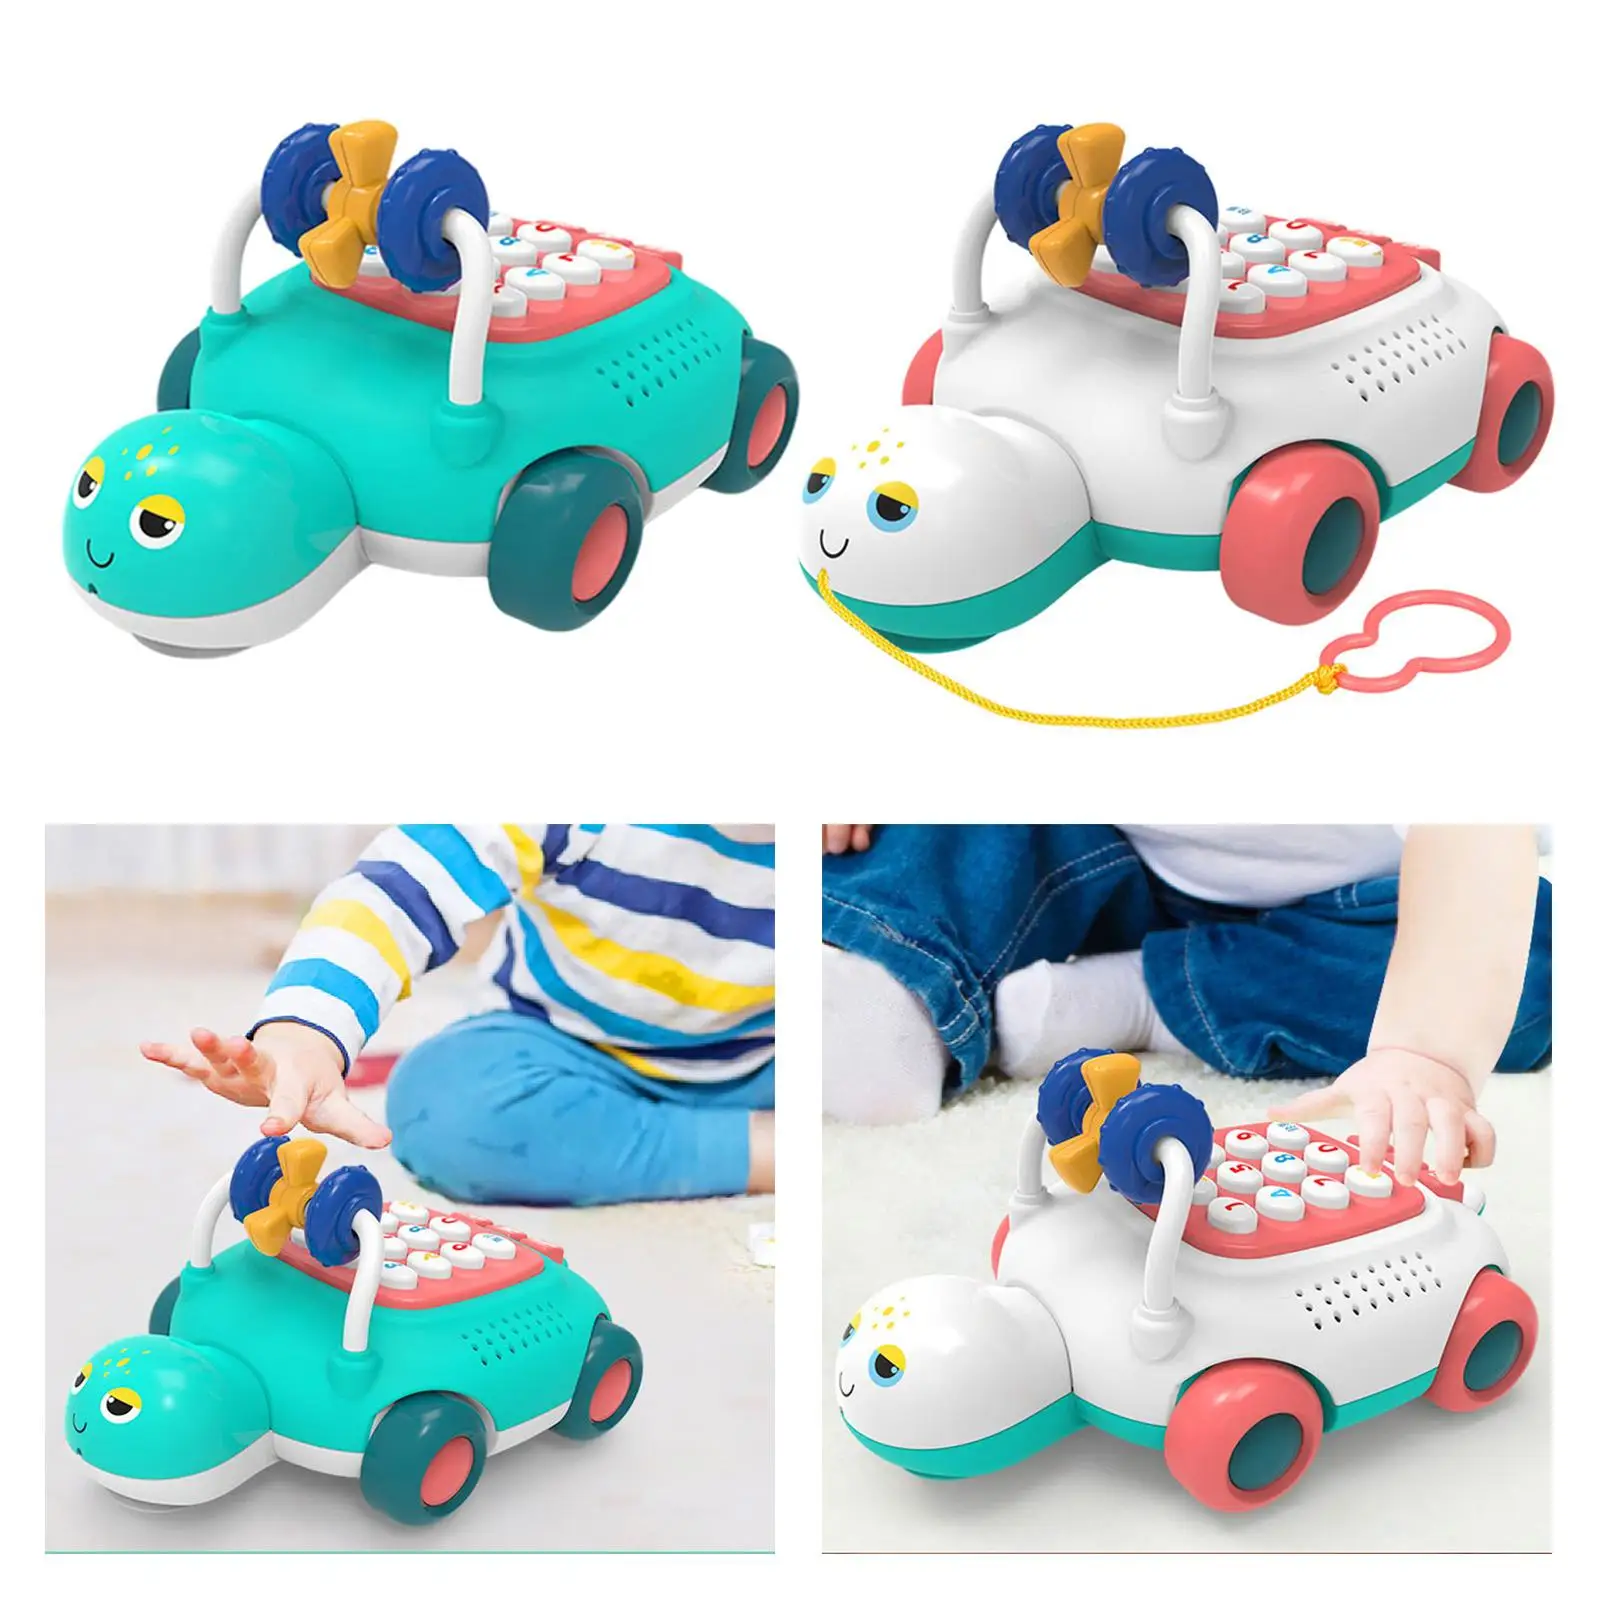 Multifunction Telephone Toys Pull Toys Development Toy Develop Cognition Toys Preschool Learning Phone Toy for Baby Infants Kids